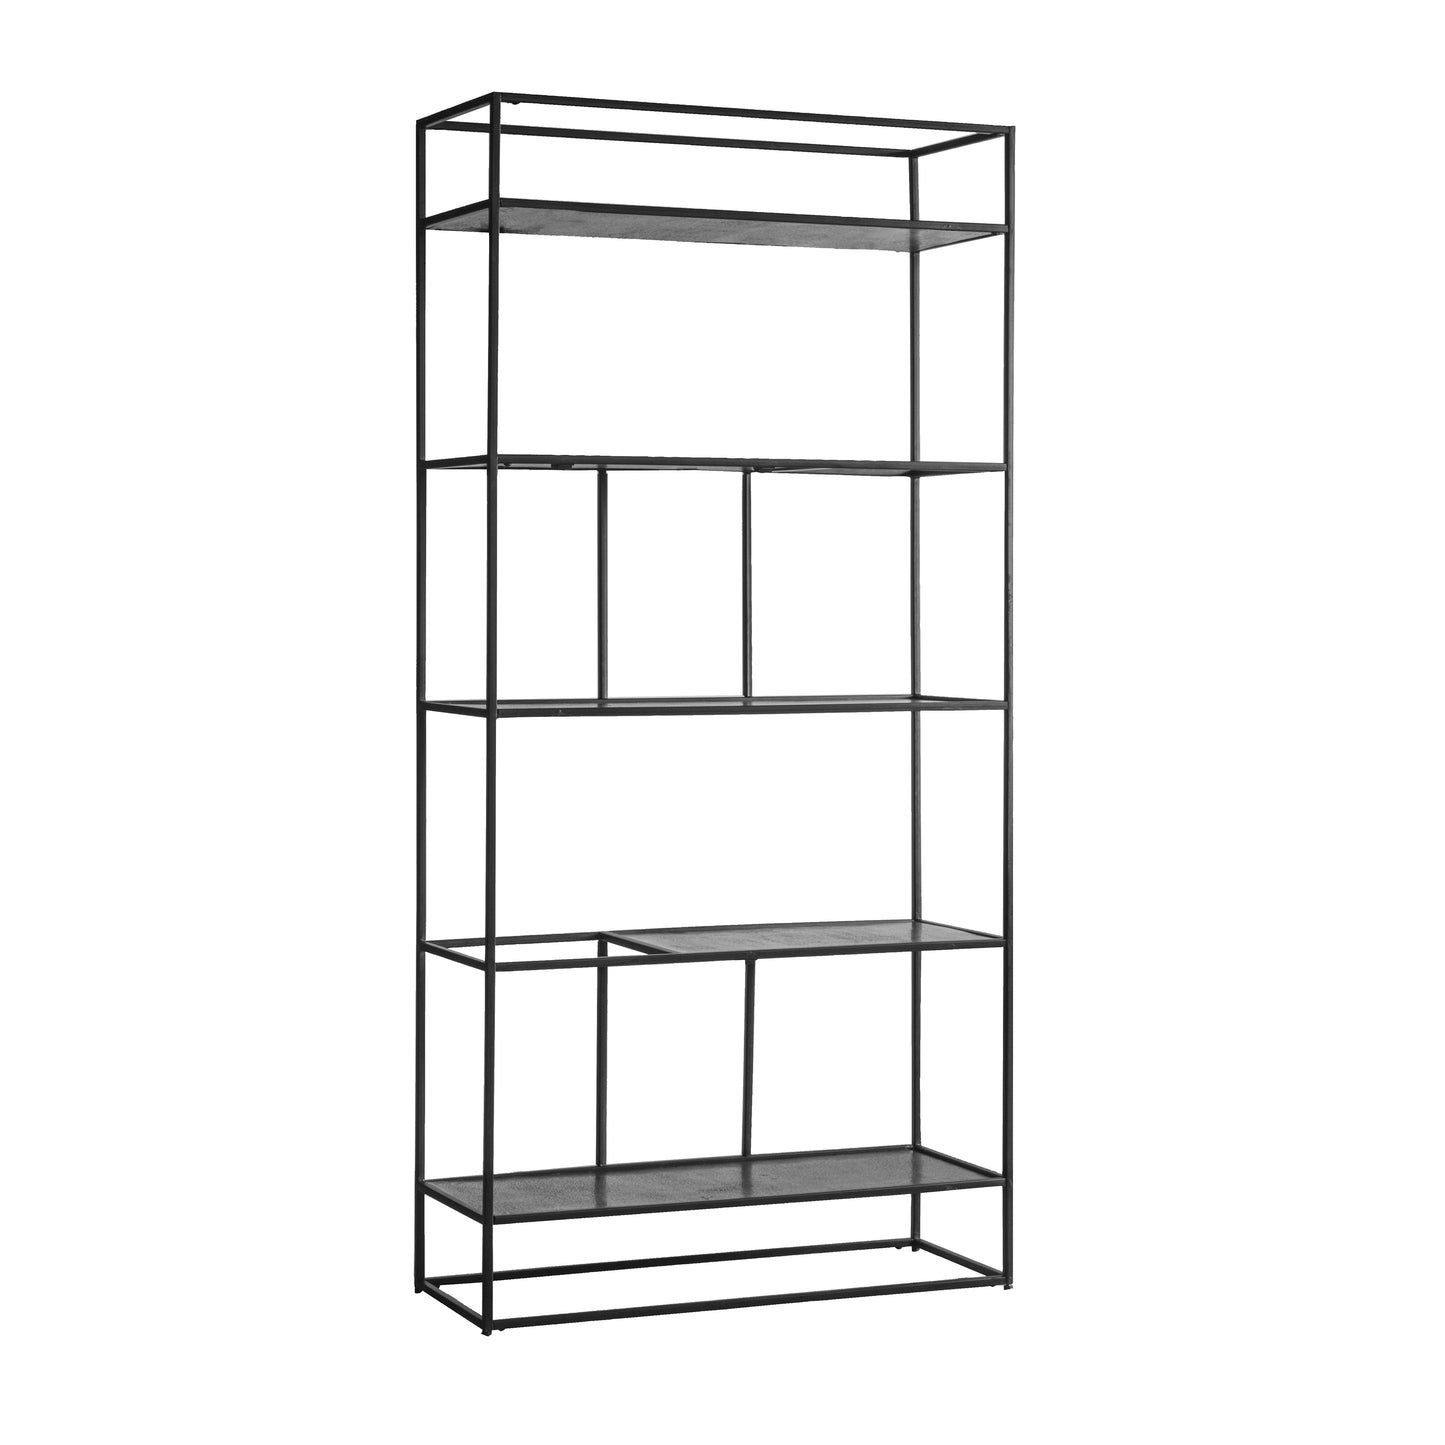 A black Bigbury Display Unit with shelves on it for interior decor.